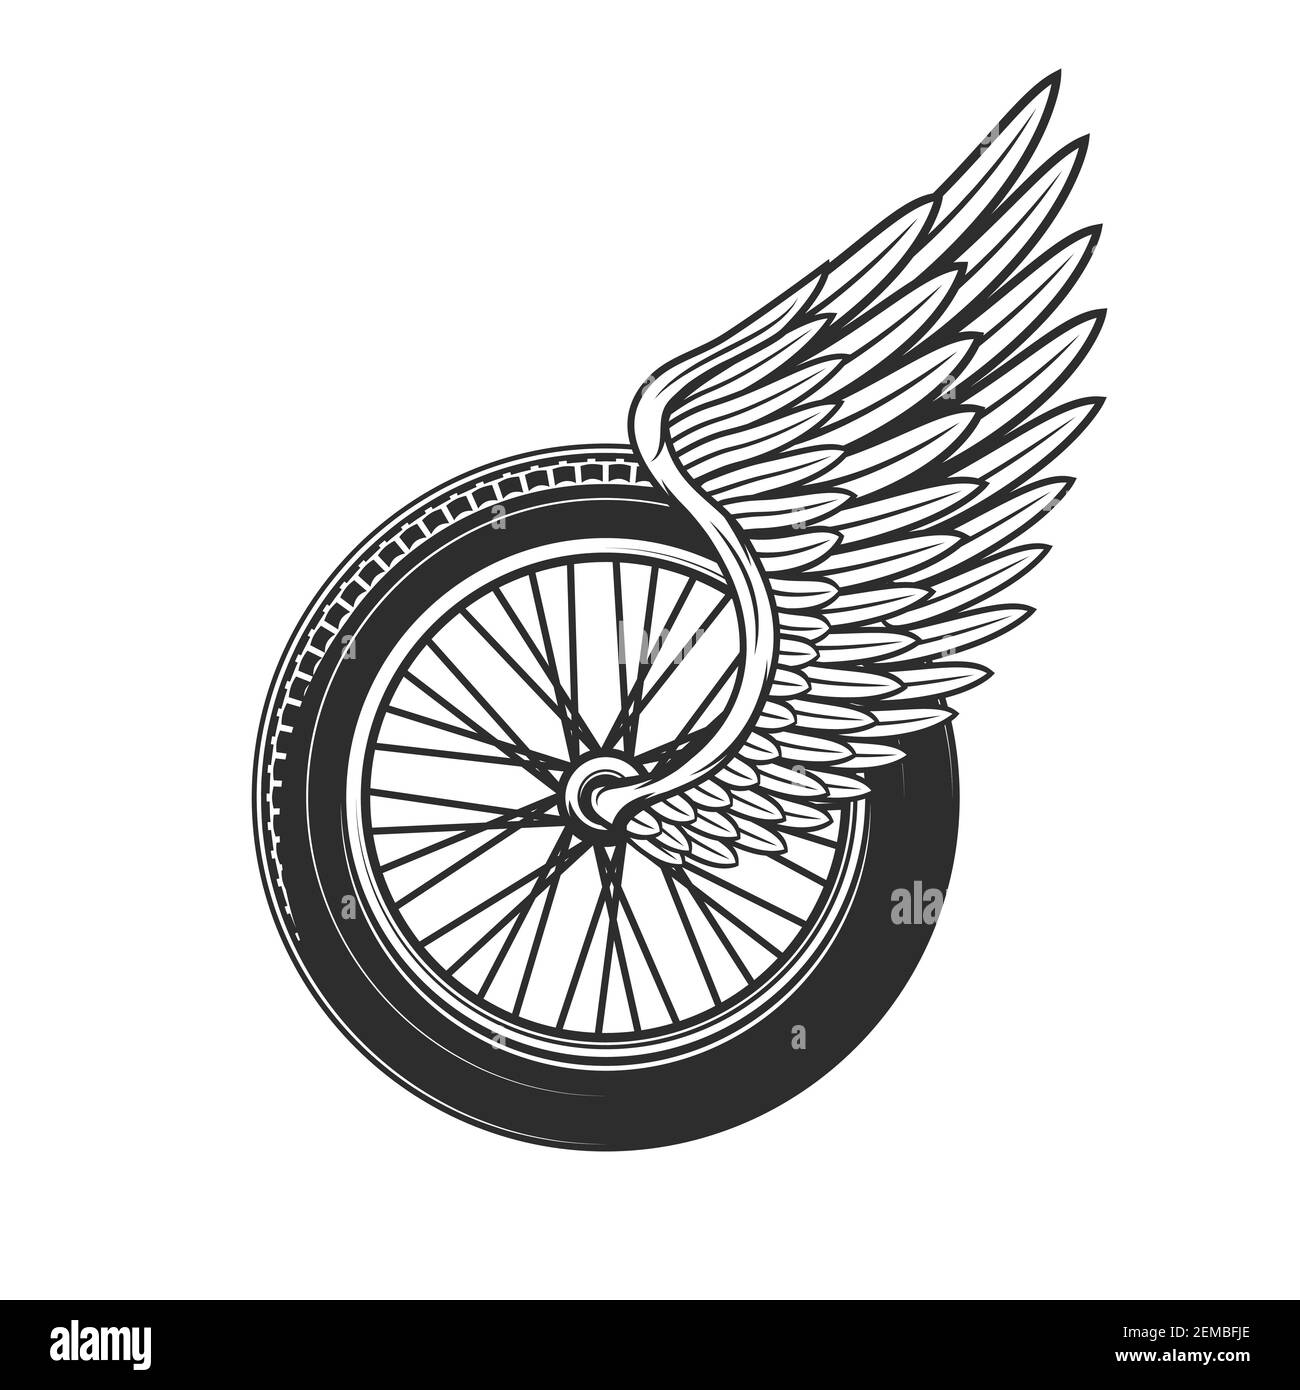 Wheel with wing, racing symbol or tattoo, speedway racing club, car and motorcycle rally races icon. Sport car championship and bike racing speedway c Stock Vector